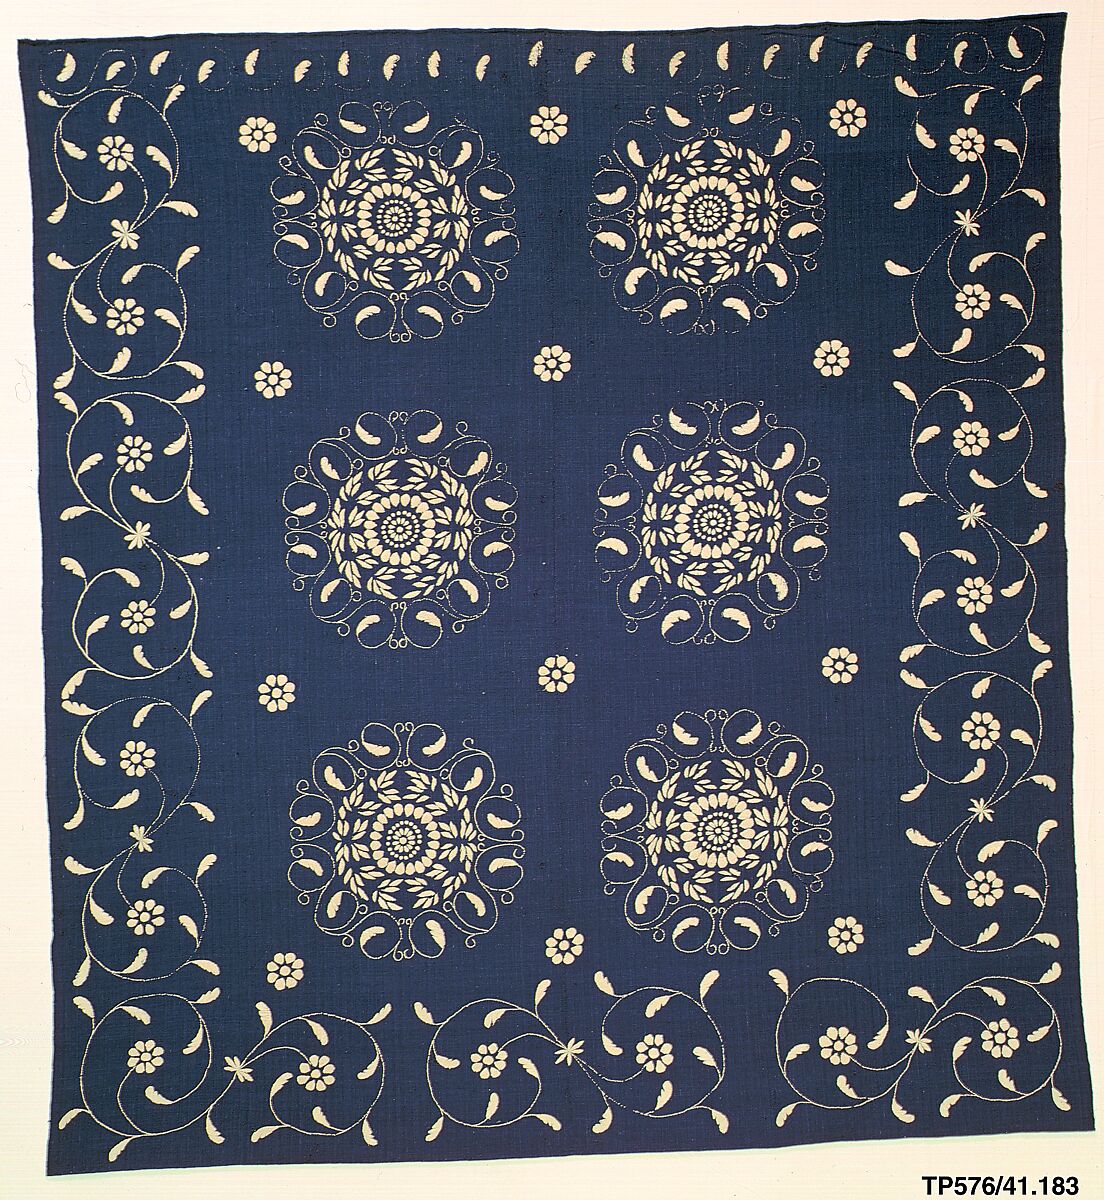 Embroidered blanket, Wool embroidered with cotton, American 